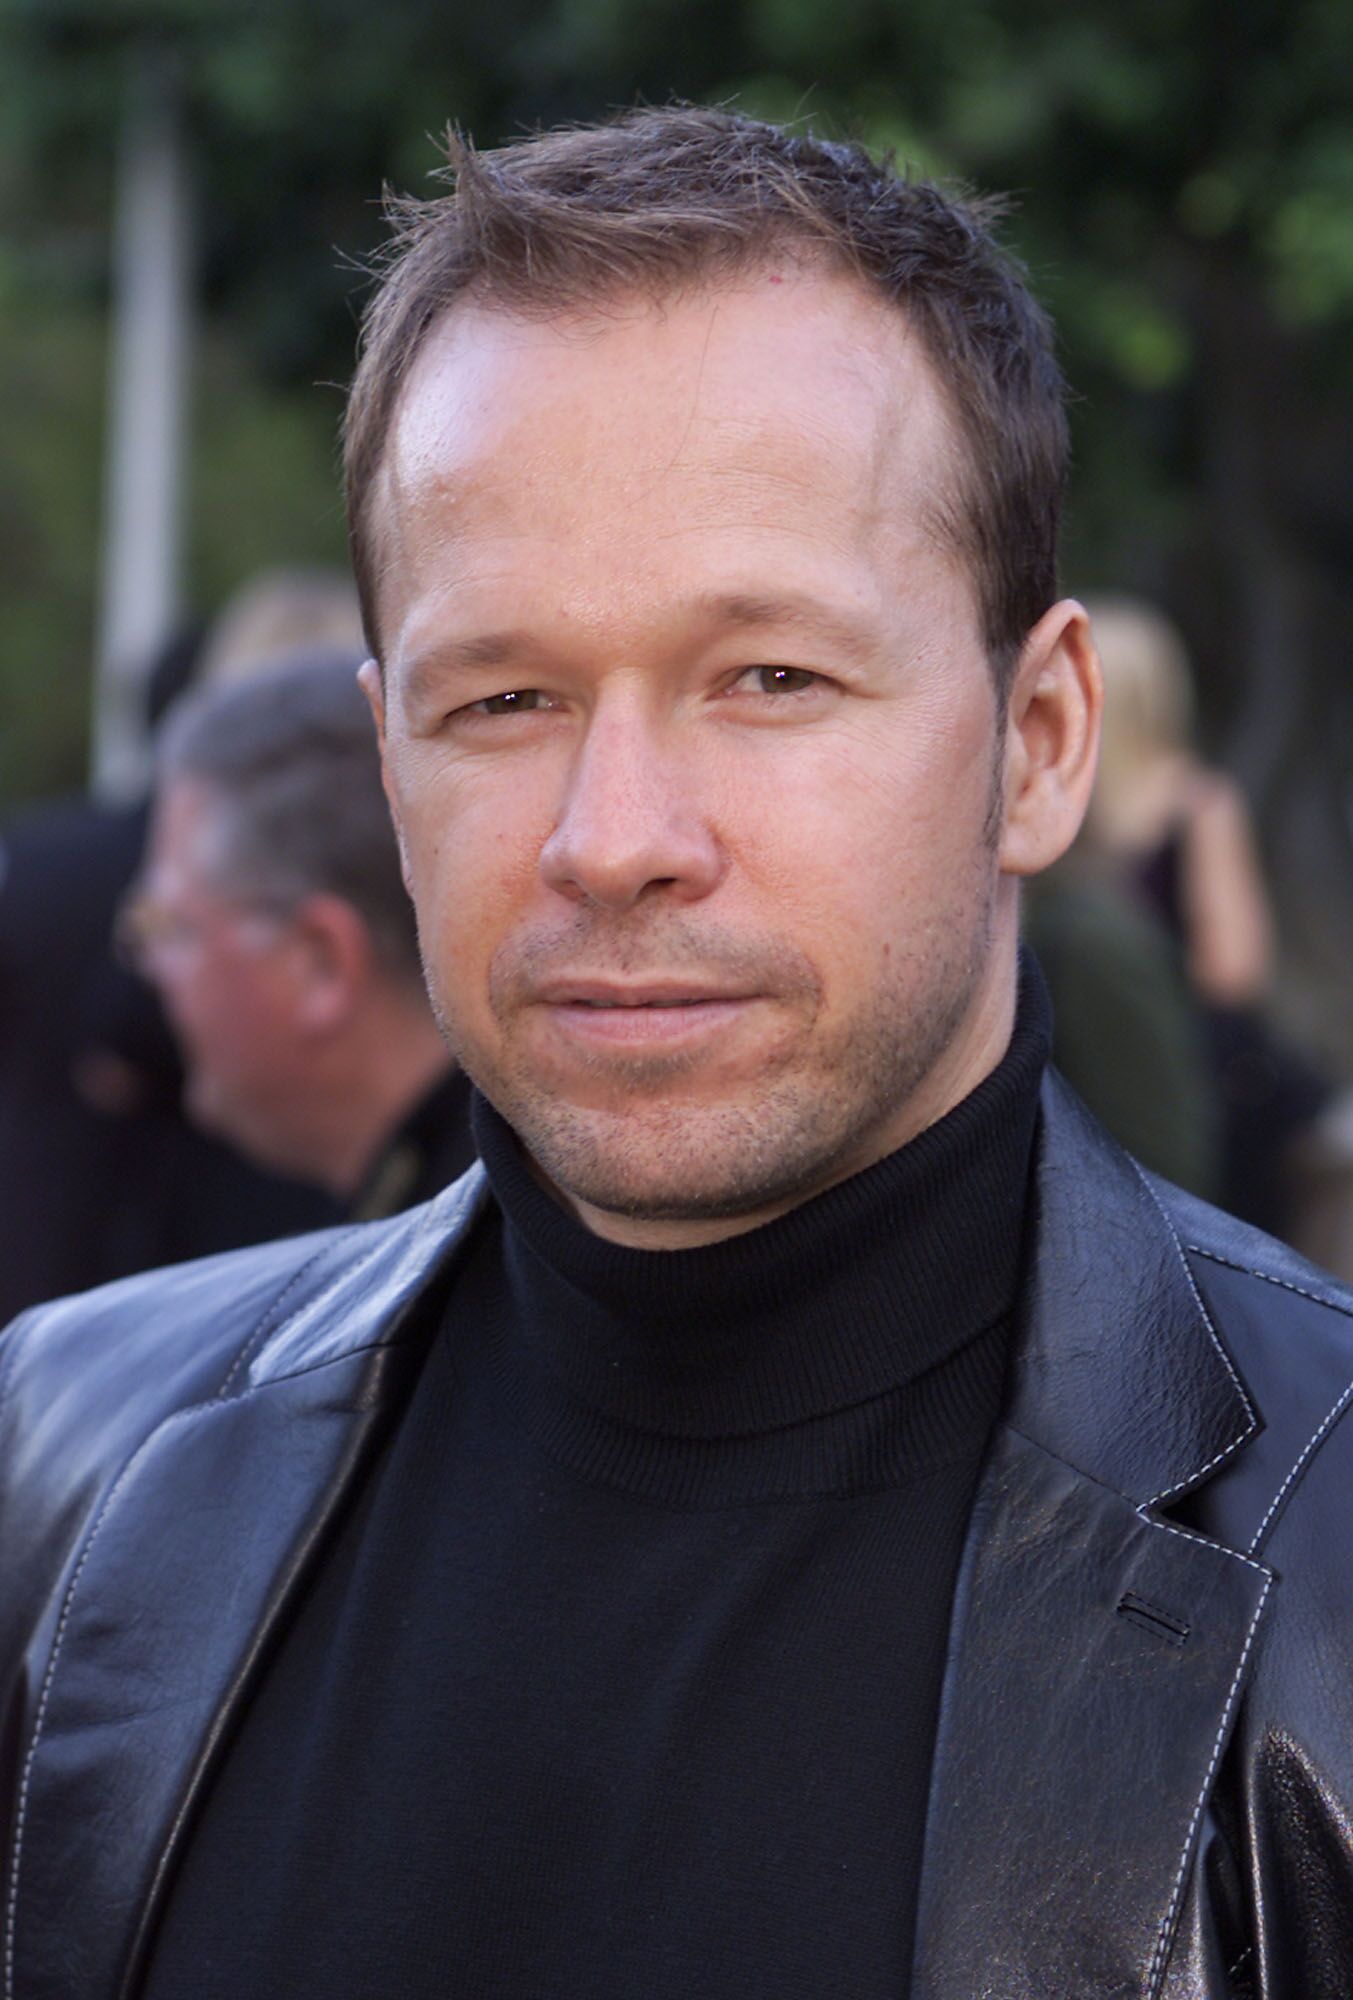 Donnie Wahlberg at the premiere of HBO's "Band of Brothers" at the Hollywood Bowl. | Photo: Getty Images